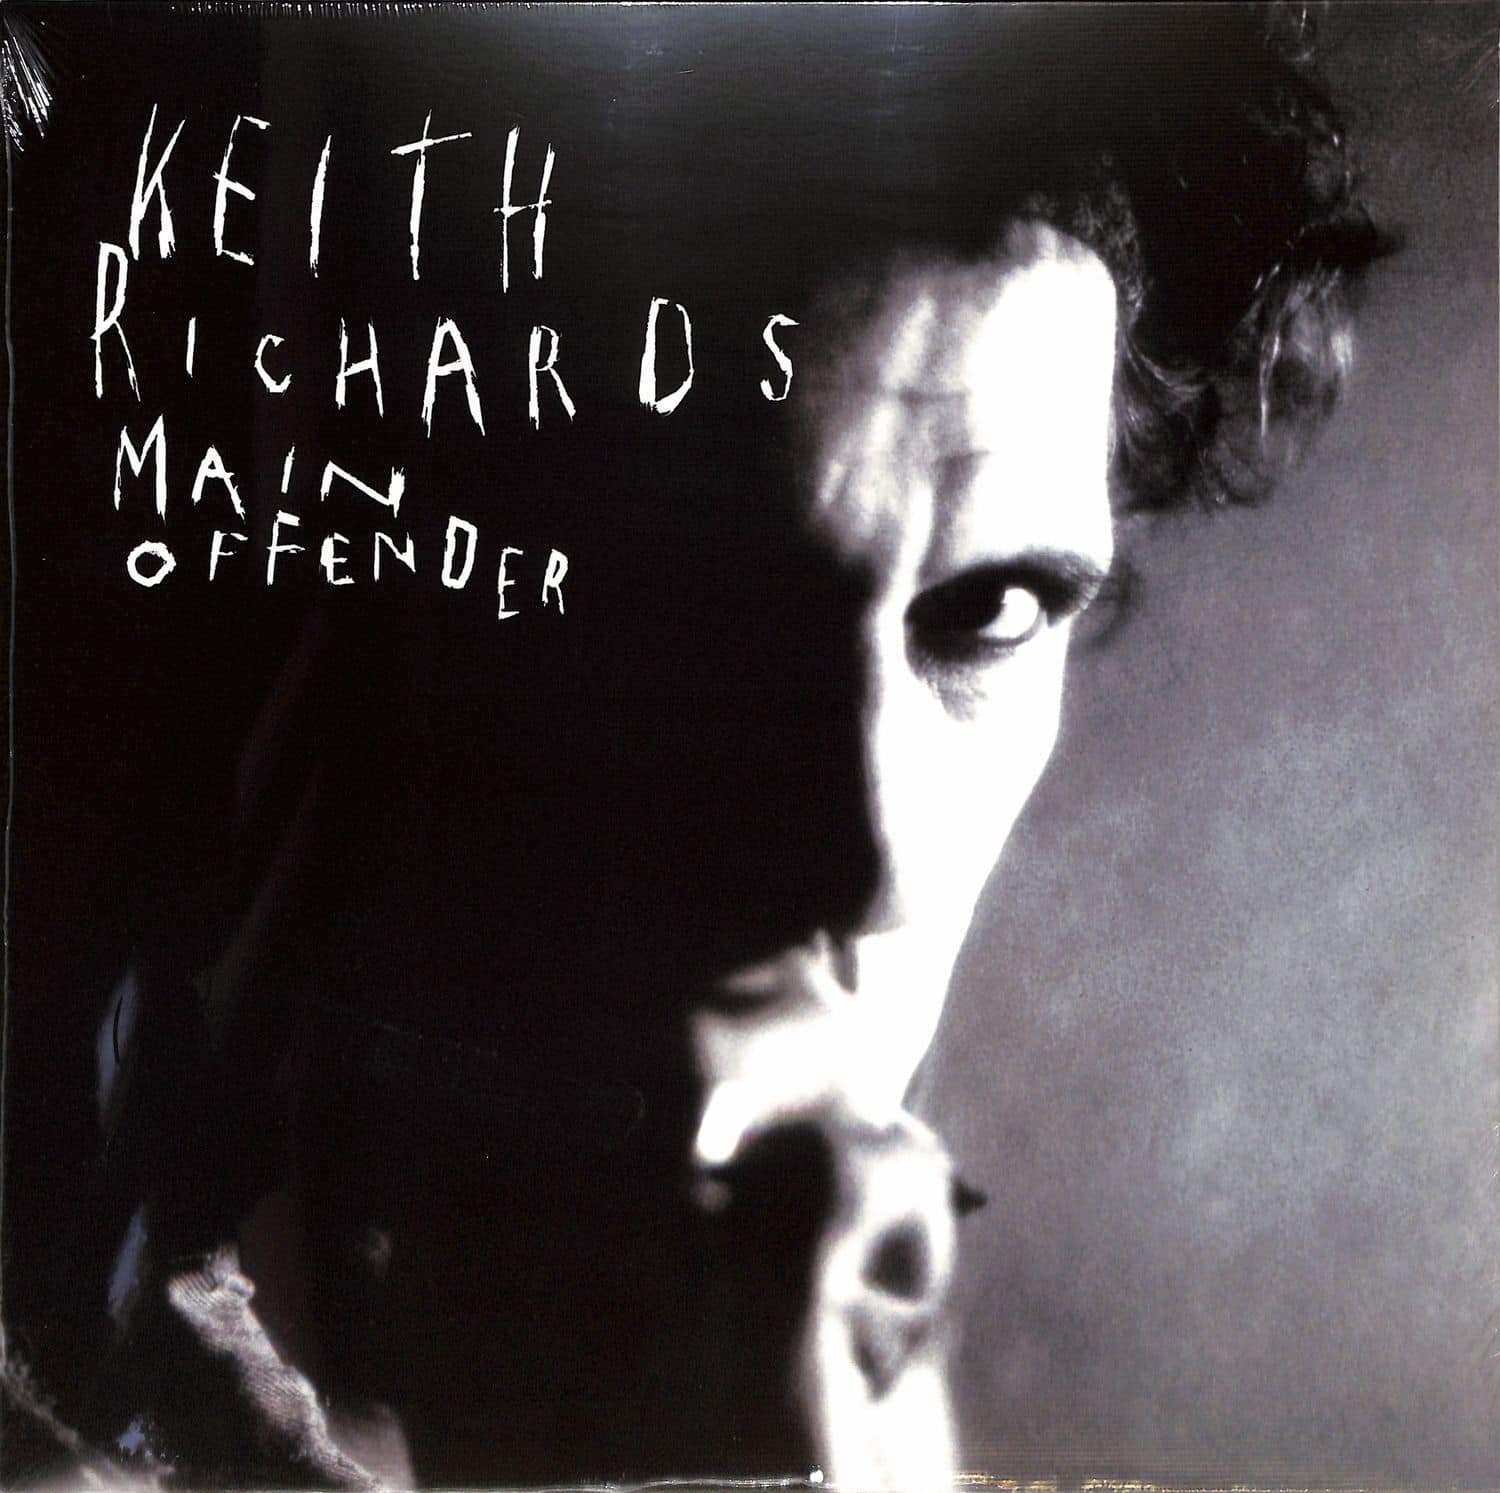 Keith Richards - MAIN OFFENDER 